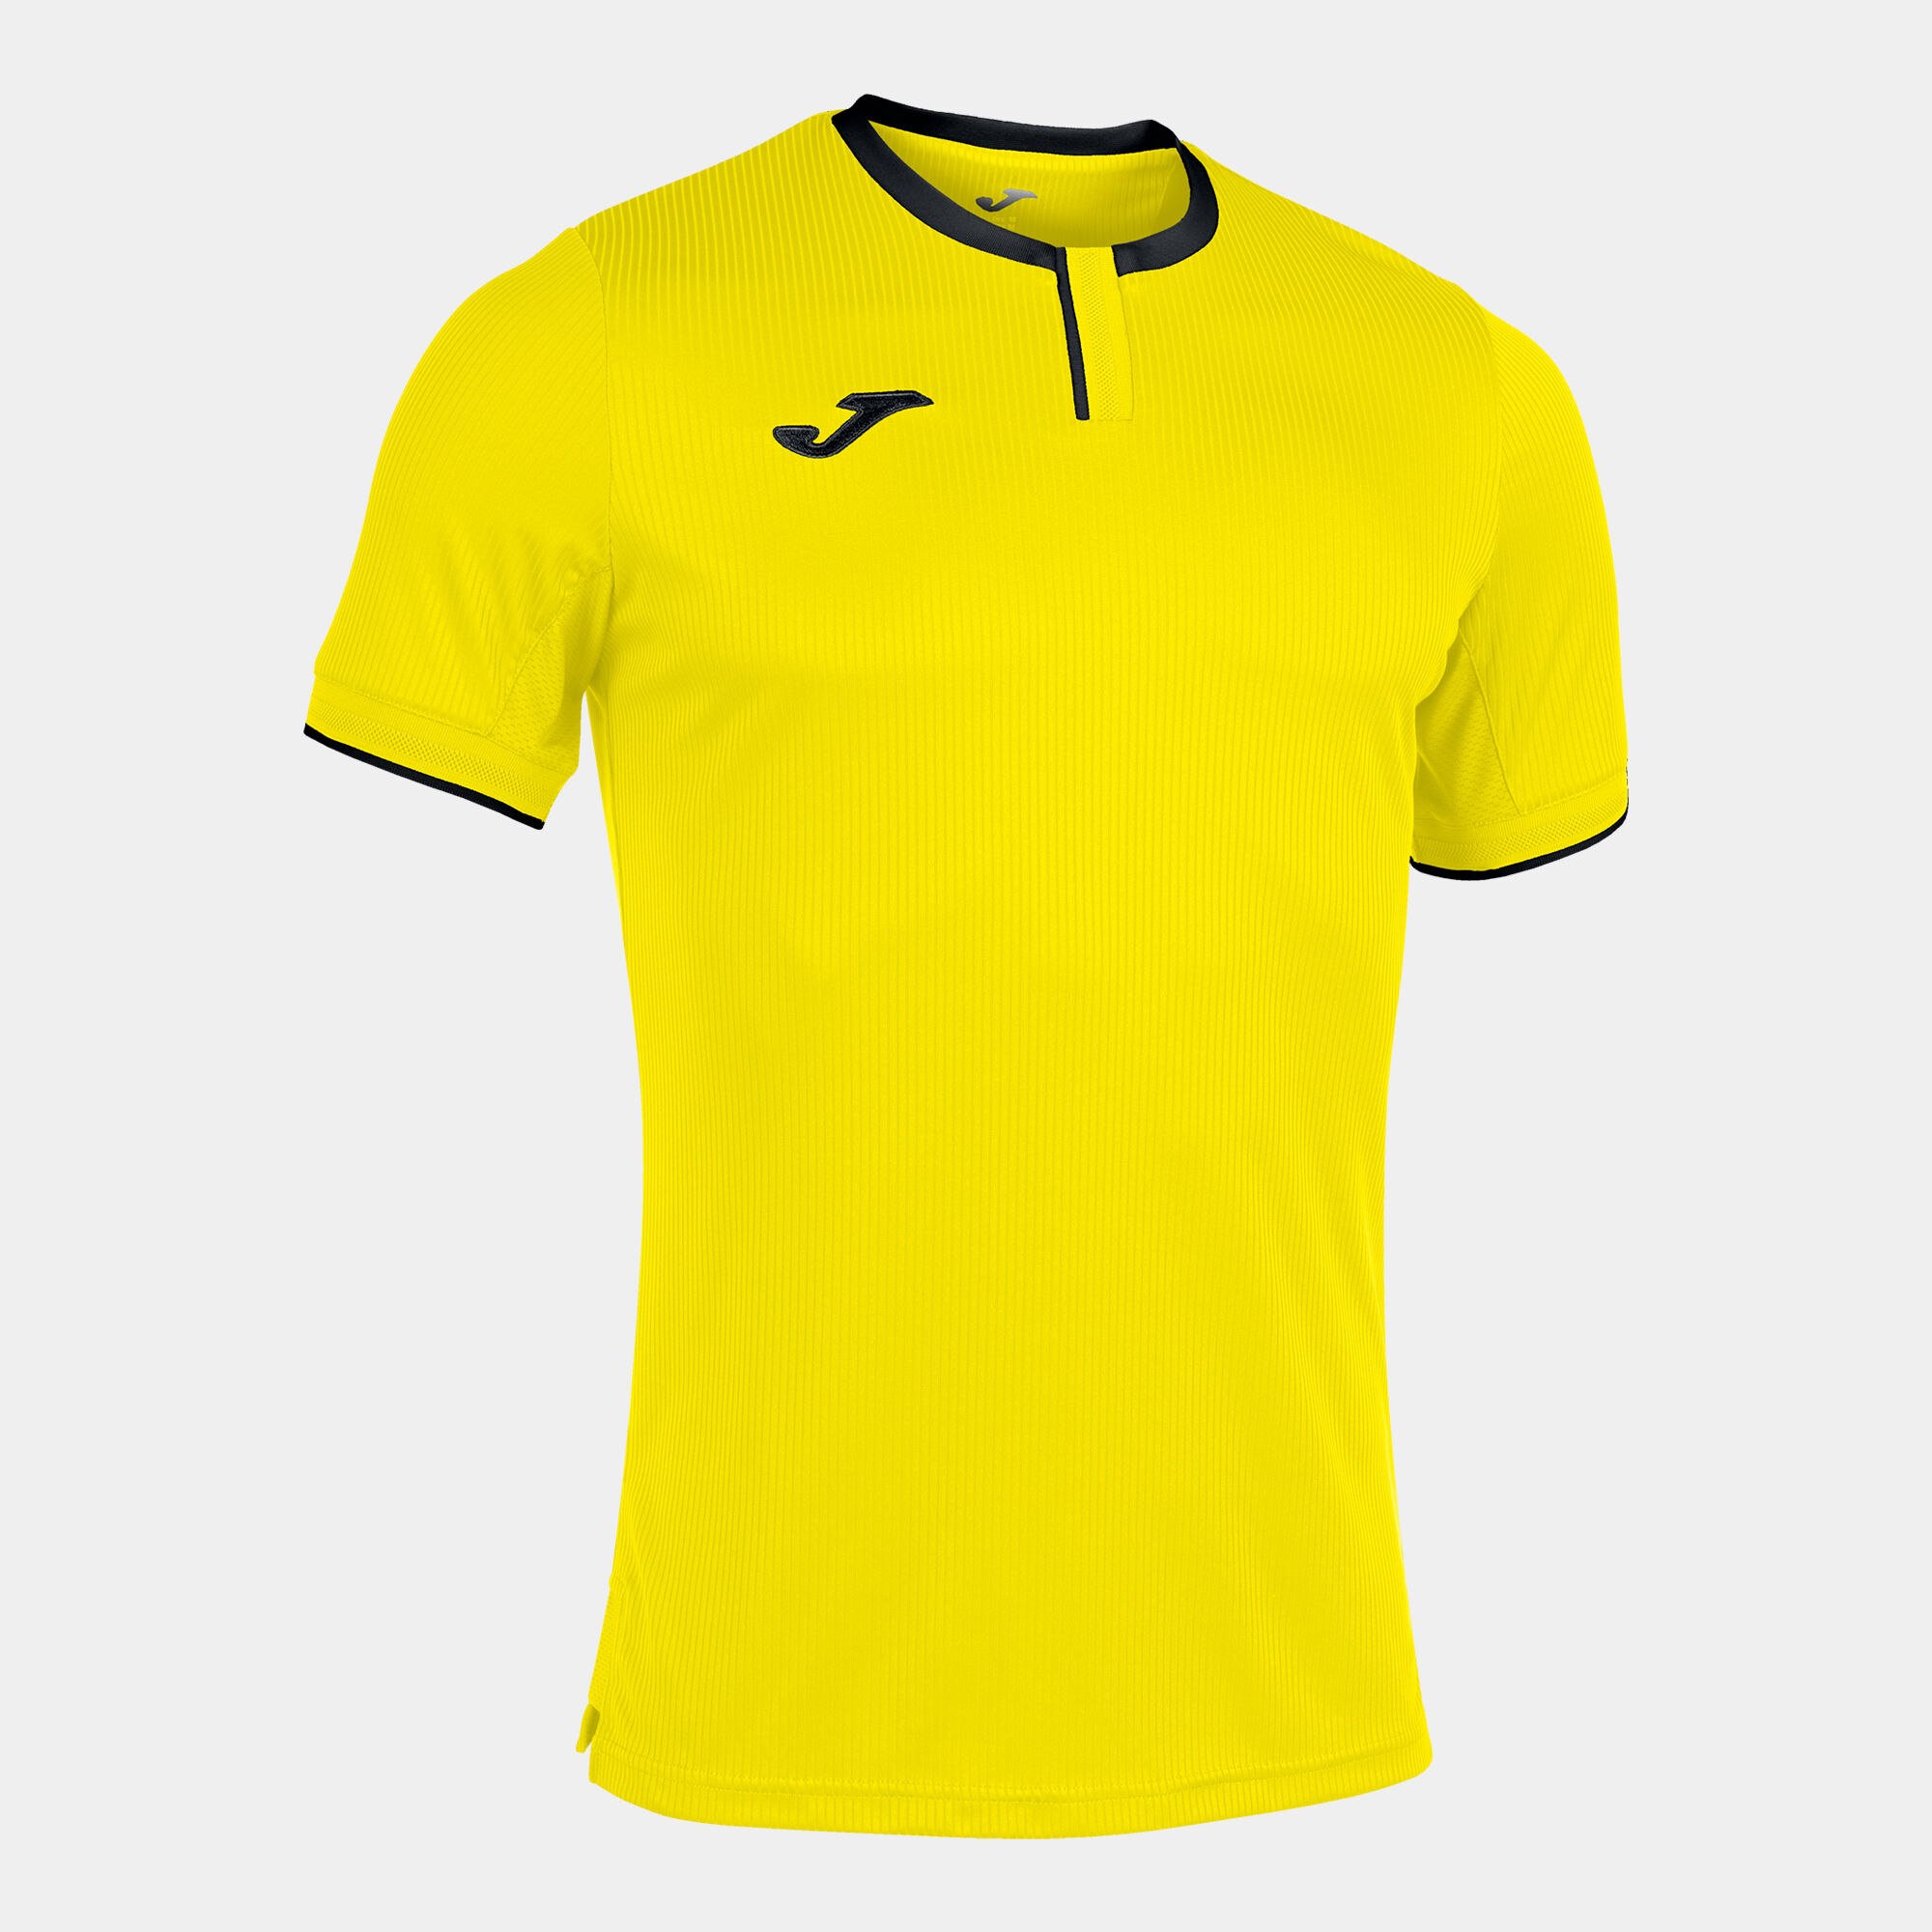 MAILLOT MANCHES COURTES HOMME GOLD III JAUNE